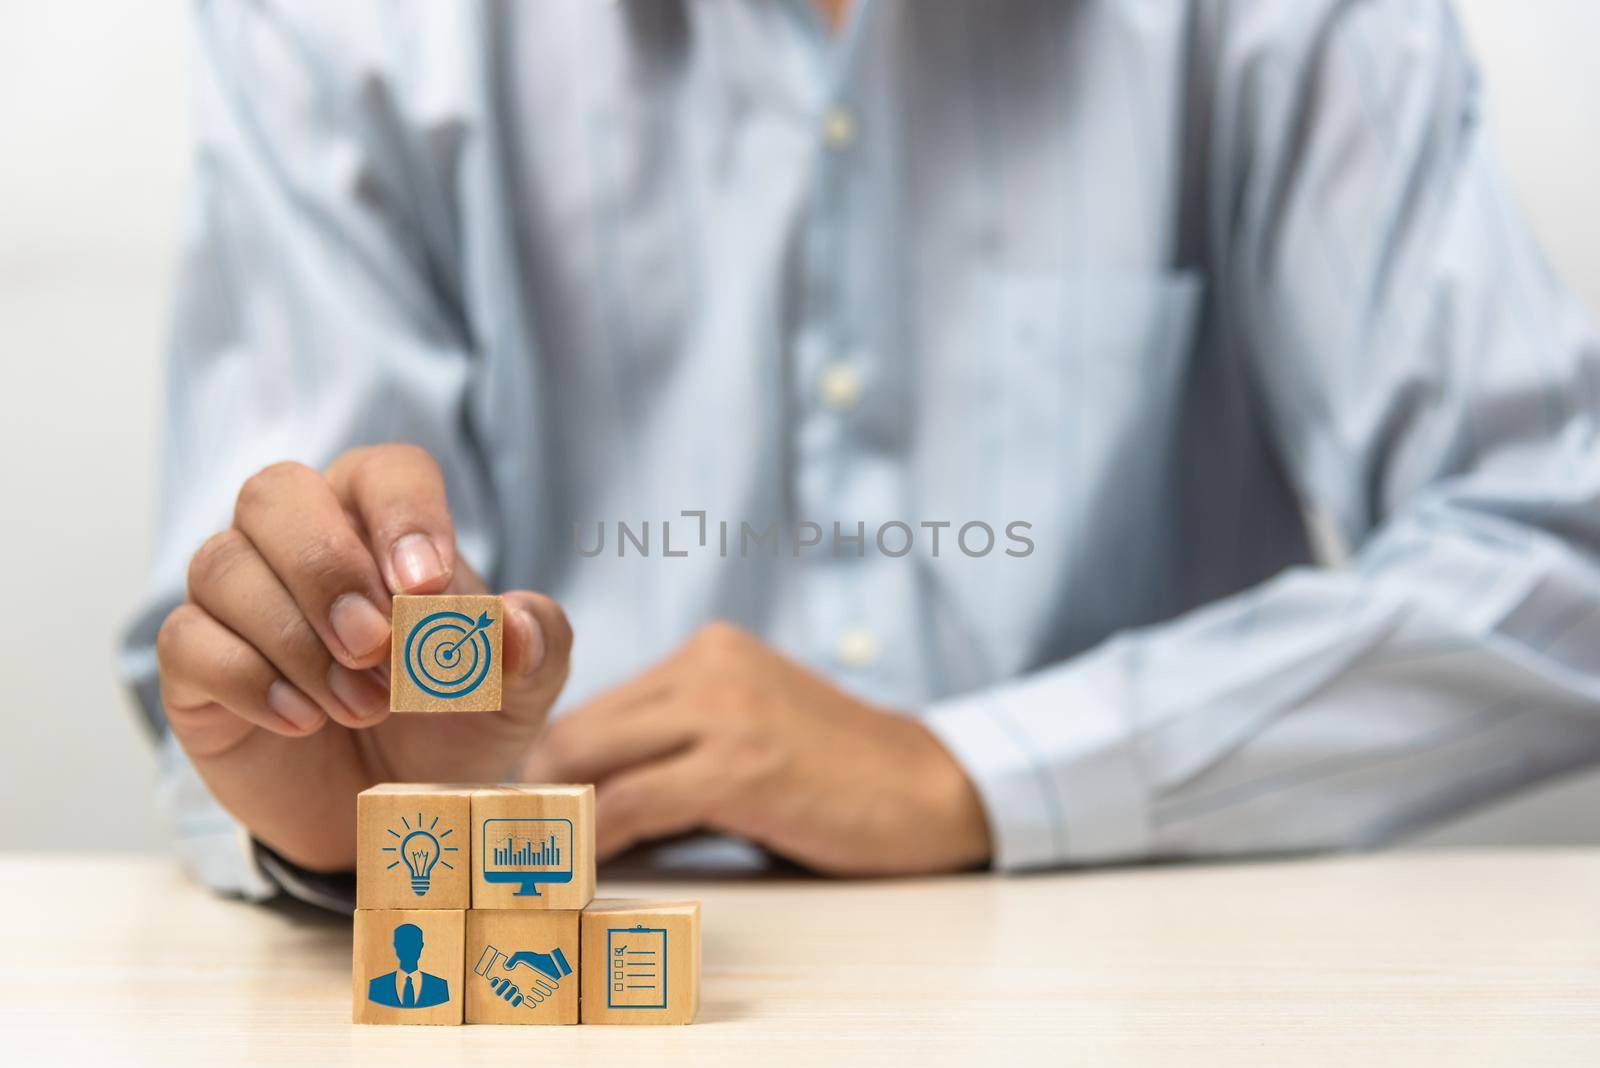 business strategy Action plan Goal and target icons with hand stack a wood cube block on a table. Copy space company development startup concept. by aoo3771